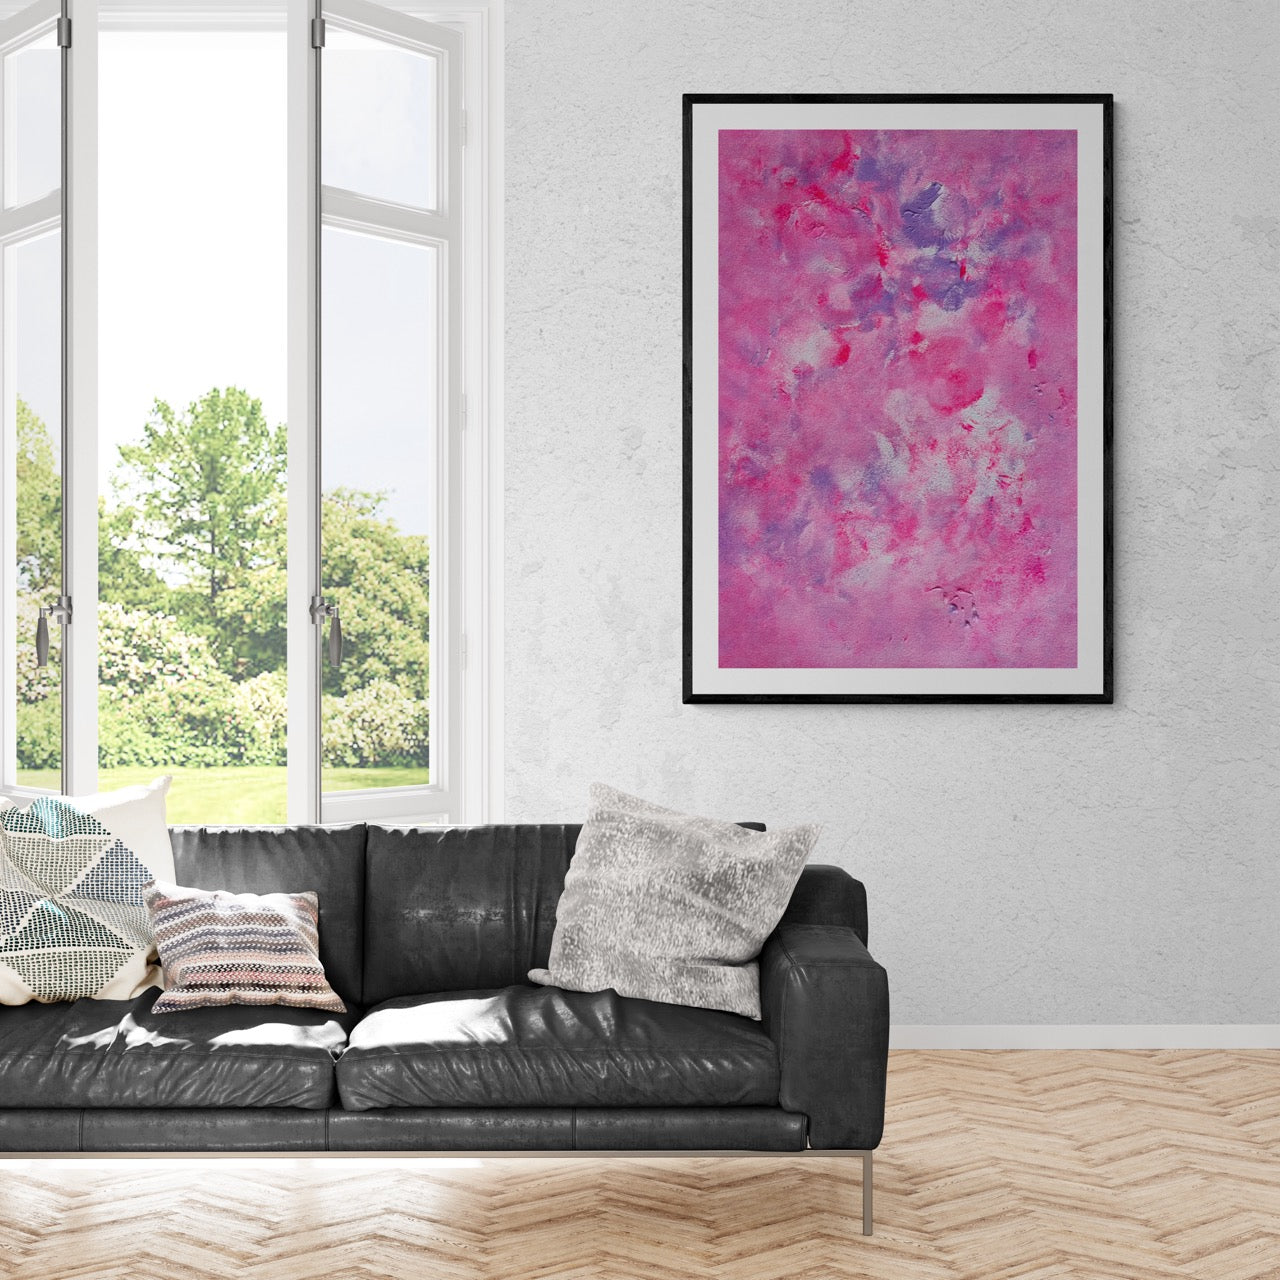 Pink, purple and white abstract art poster with a black frame hanging vertically on a grey sement wall in a stately house with a view to a green park outside. In front of the painting is a black leather sofa with cushions. The floor is wood and herringbone pattern 